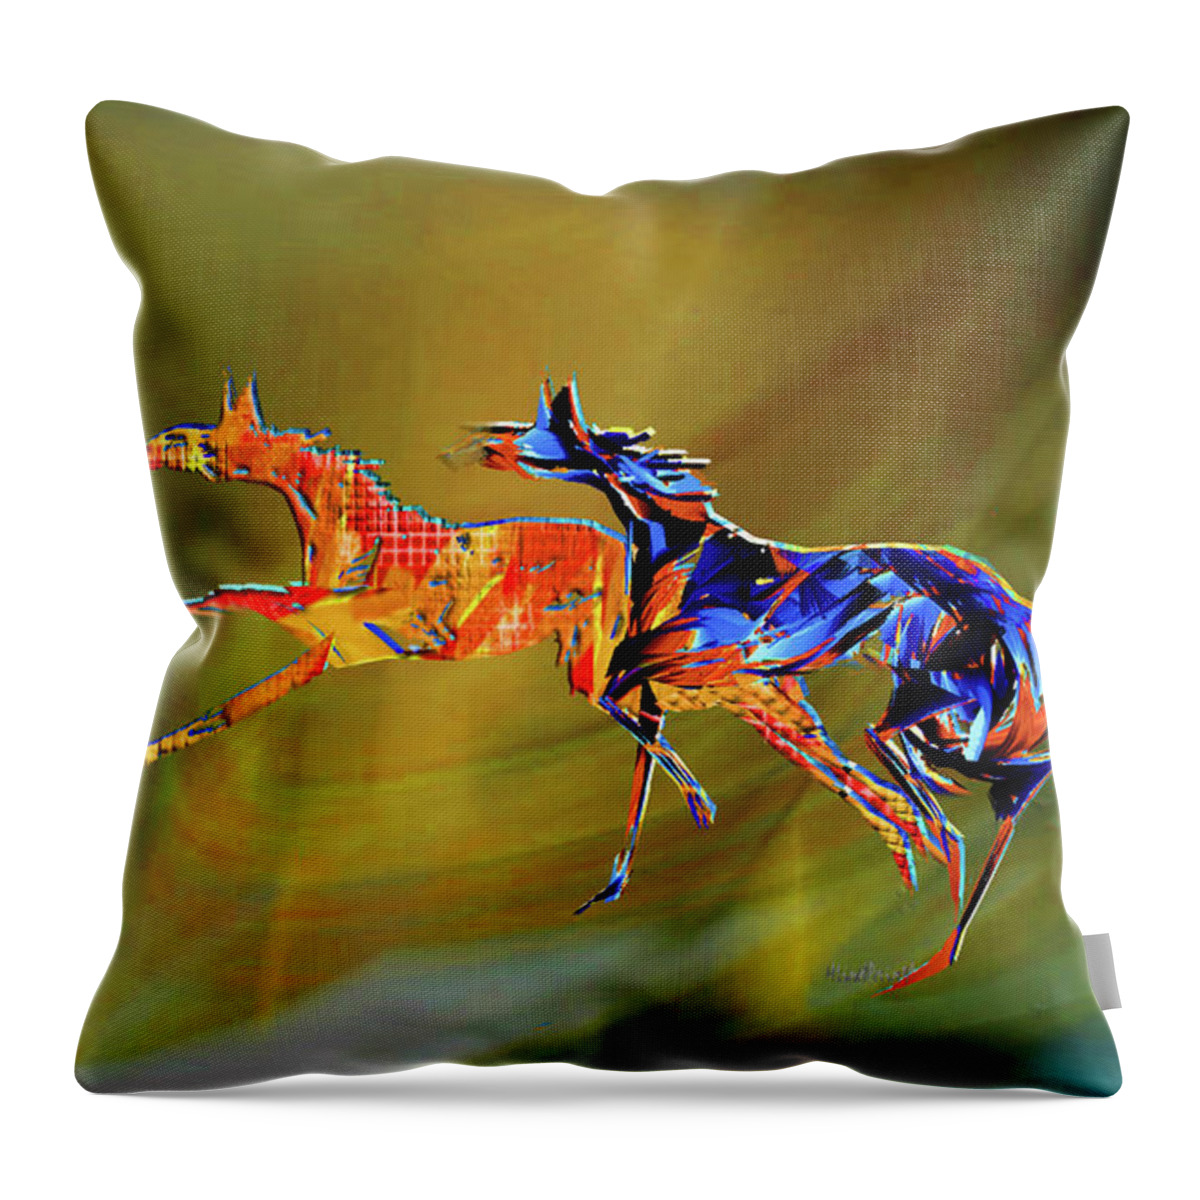 Horses Throw Pillow featuring the digital art Escape to the Wild by Asok Mukhopadhyay